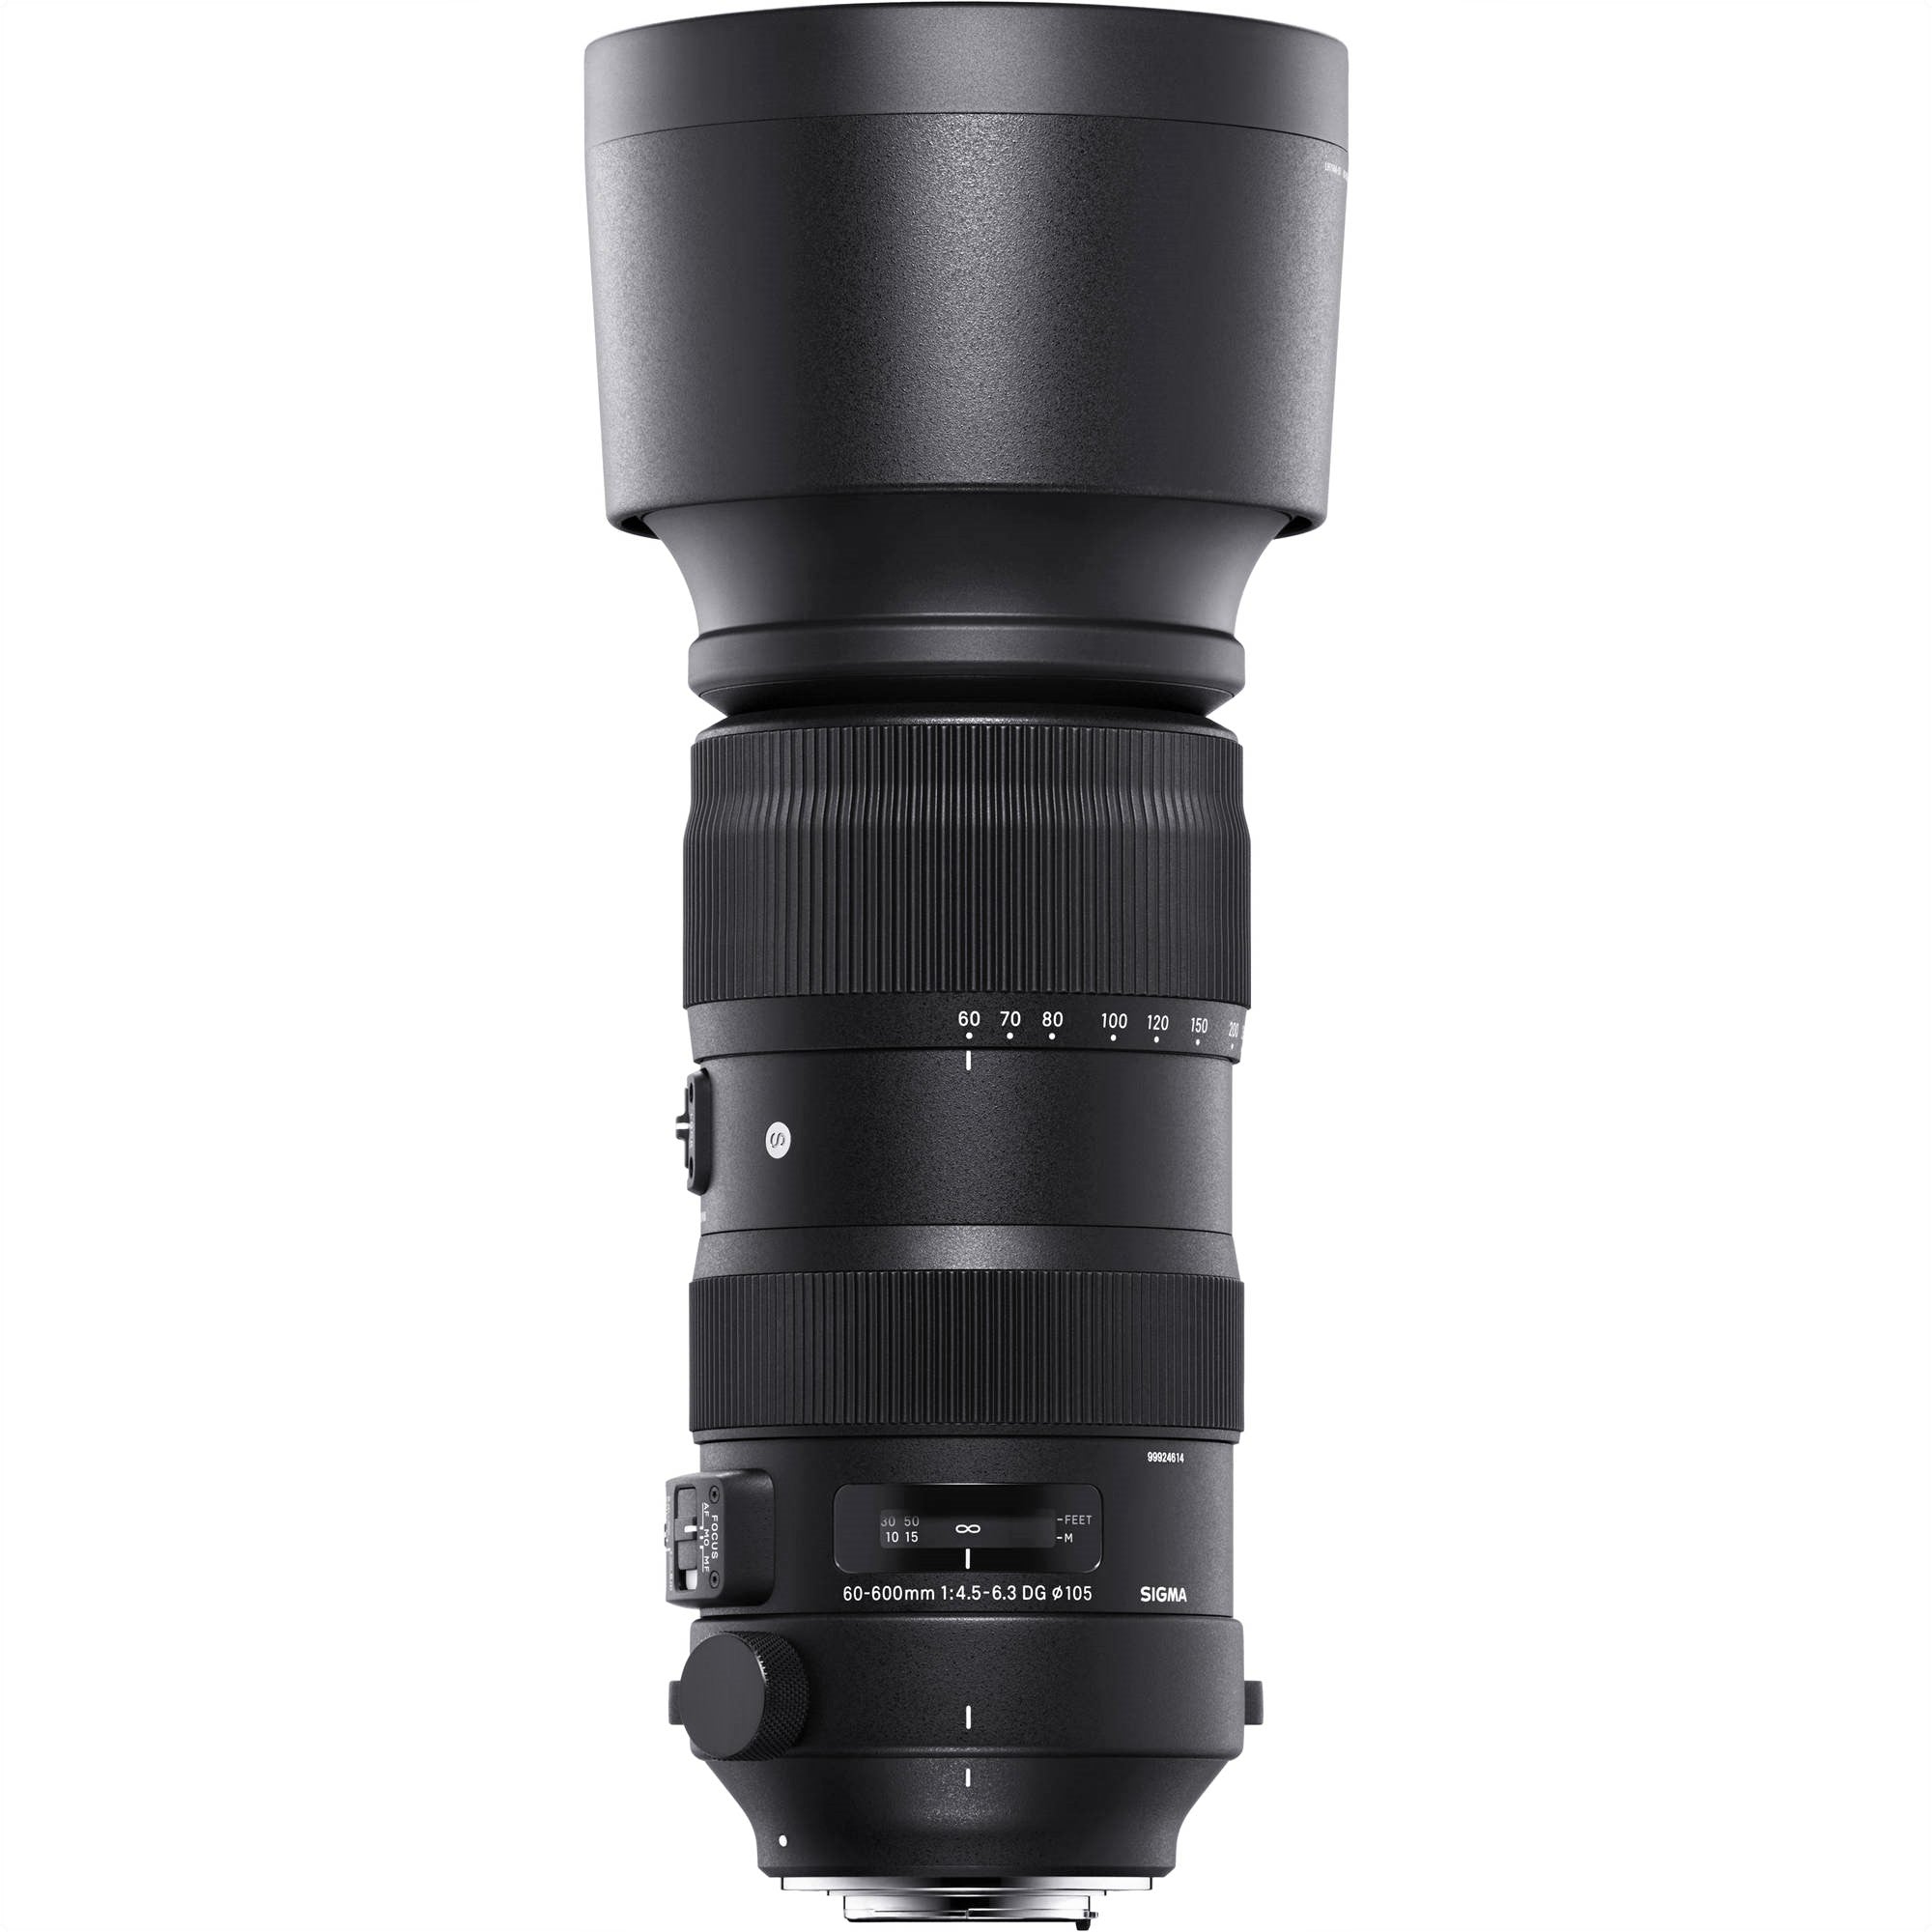 Sigma Lens Hood Attached to 60-600mm F4.5-6.3 DG OS HSM Sports Lens